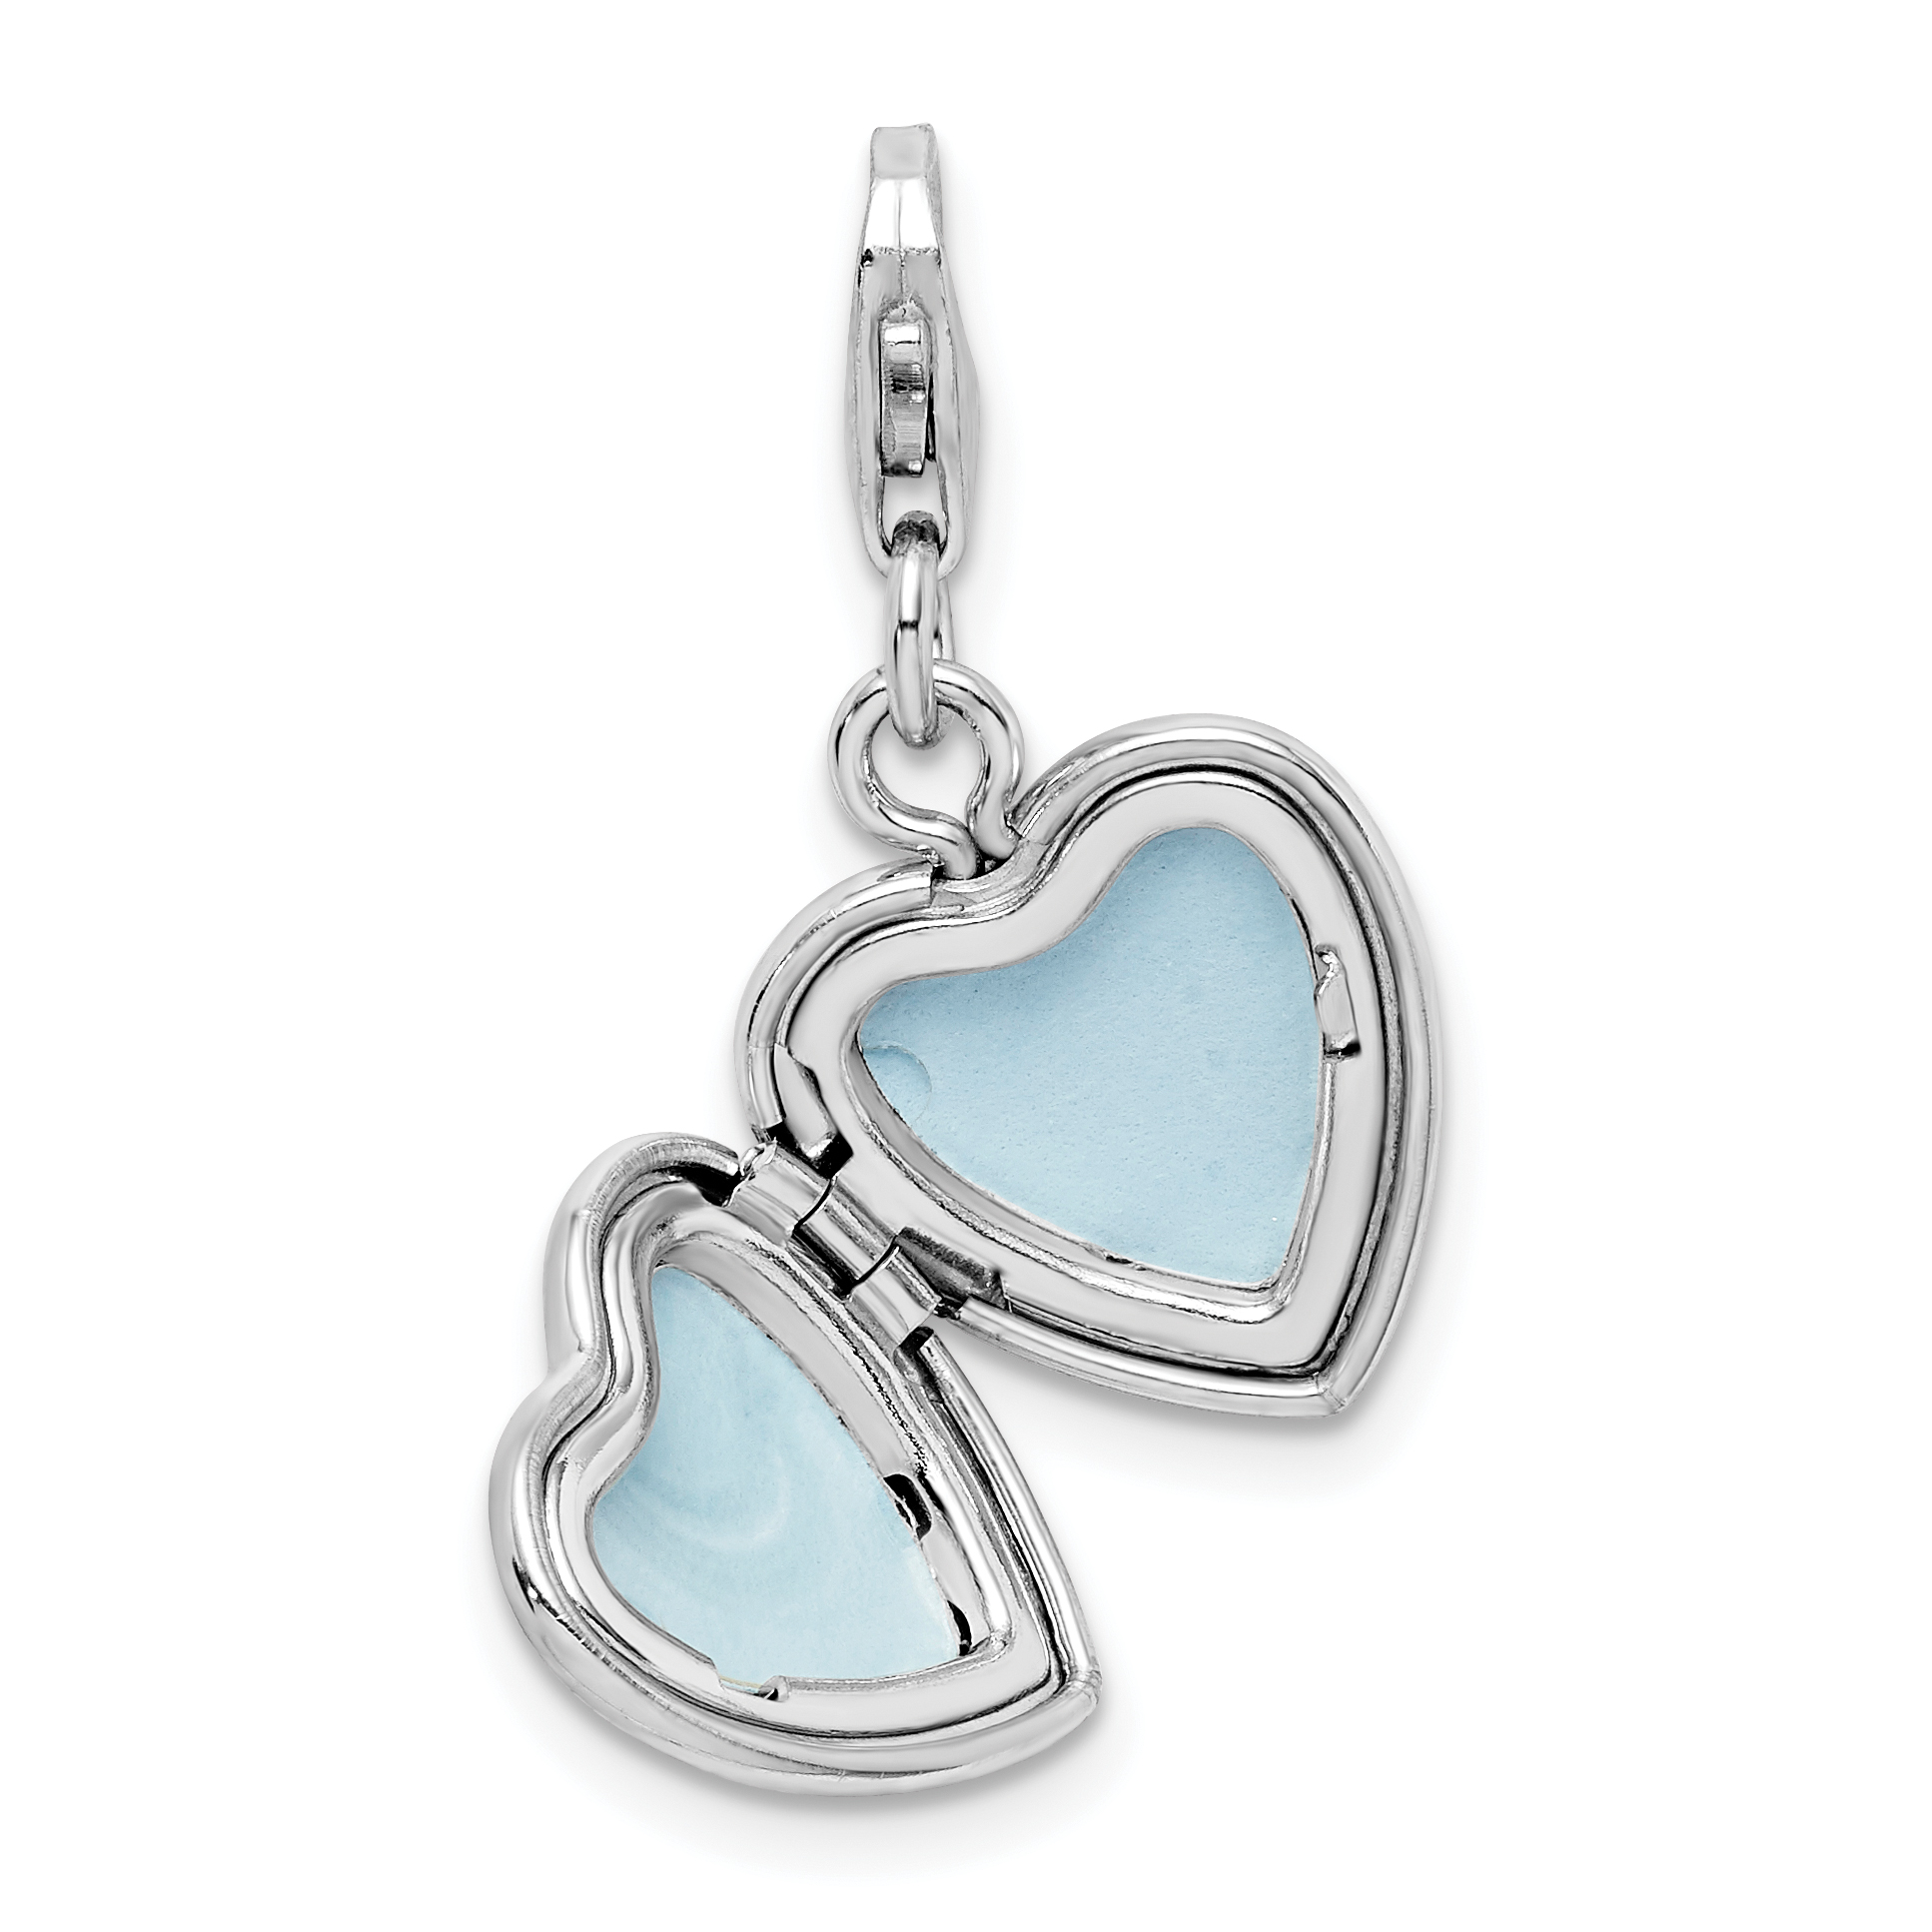 Sterling Silver 0.4IN Polished Lobster Clasp Heart Locket (0.5IN x 0.4IN ) - image 4 of 5